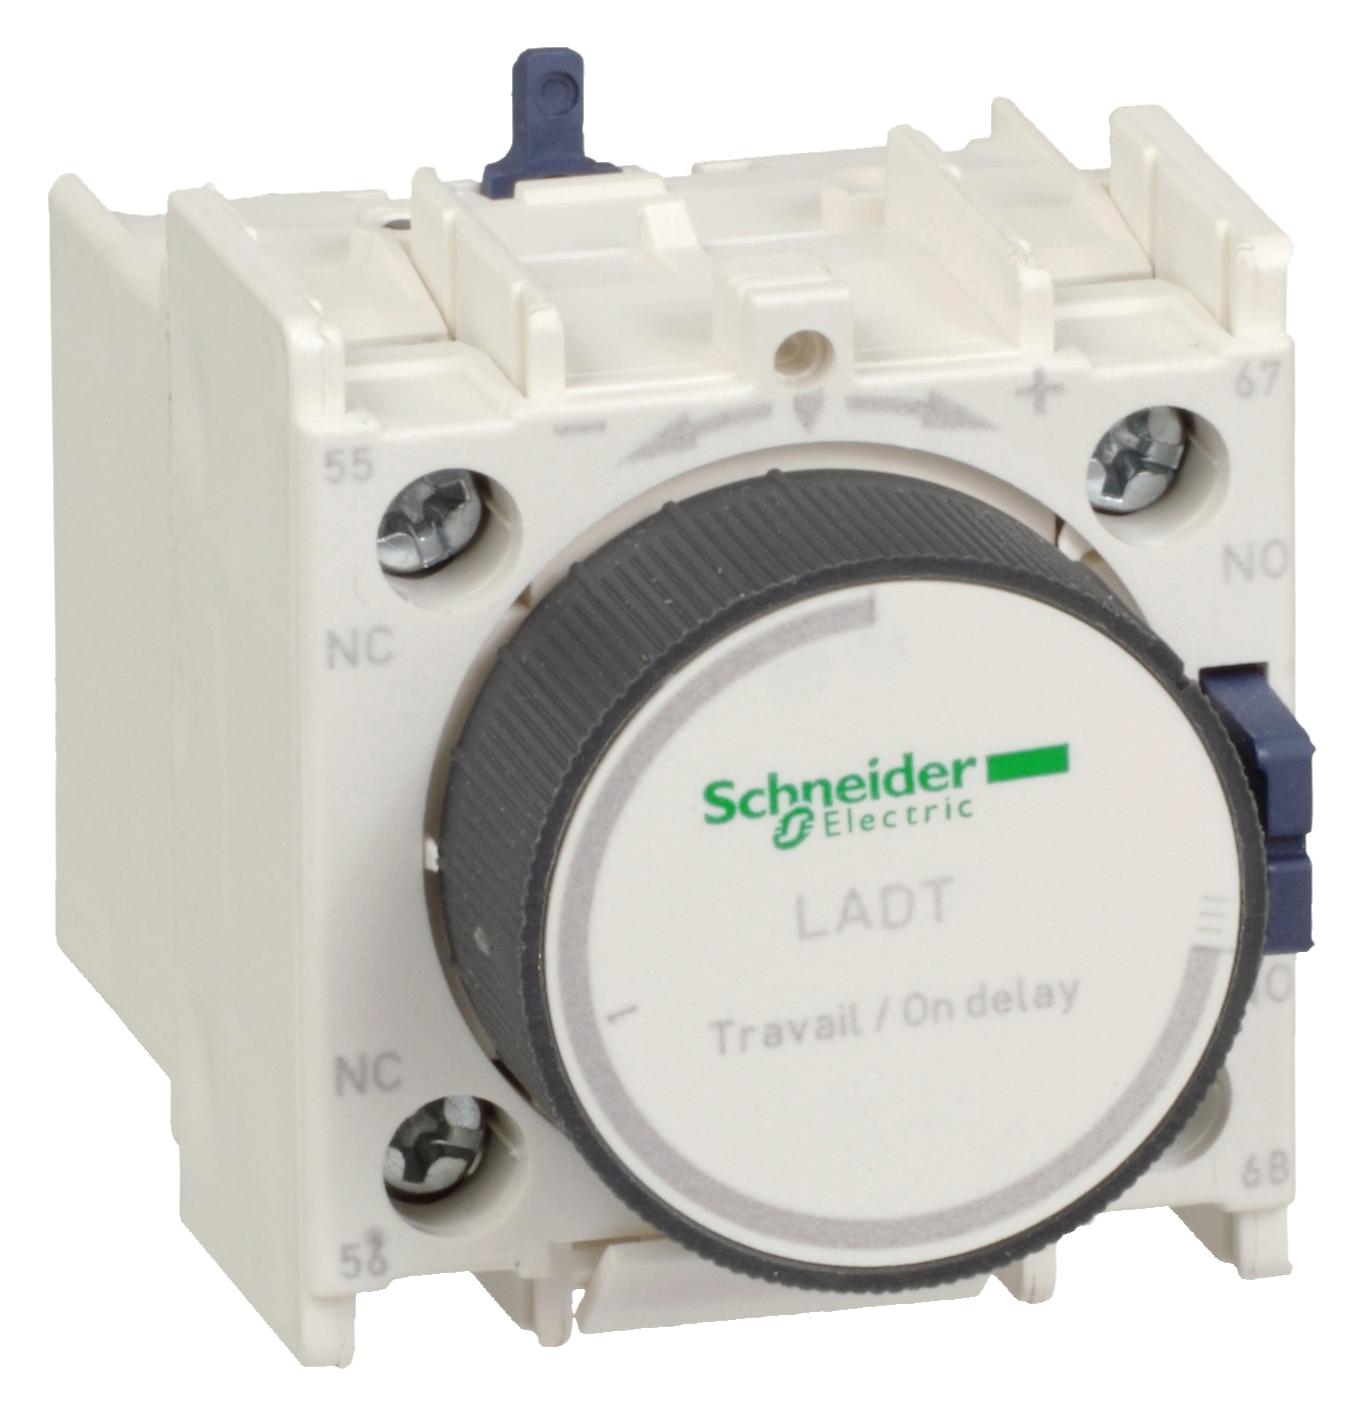 LADT06 CONTACTS BLOCK SCHNEIDER ELECTRIC